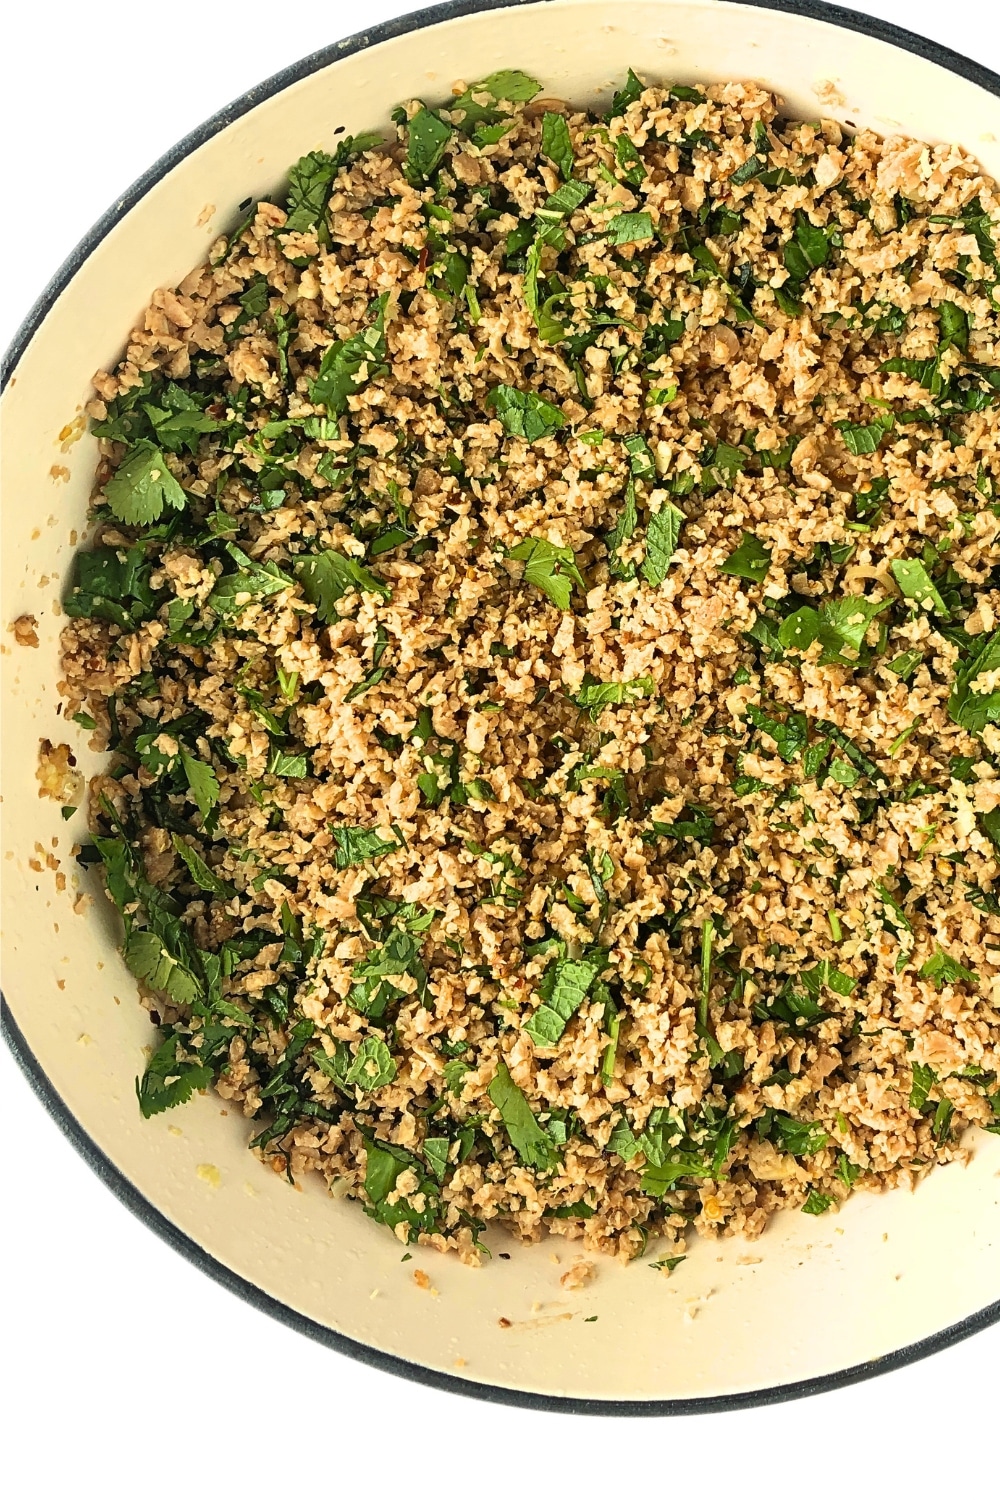 Top-down view of finished vegan larb in a white frying pan.